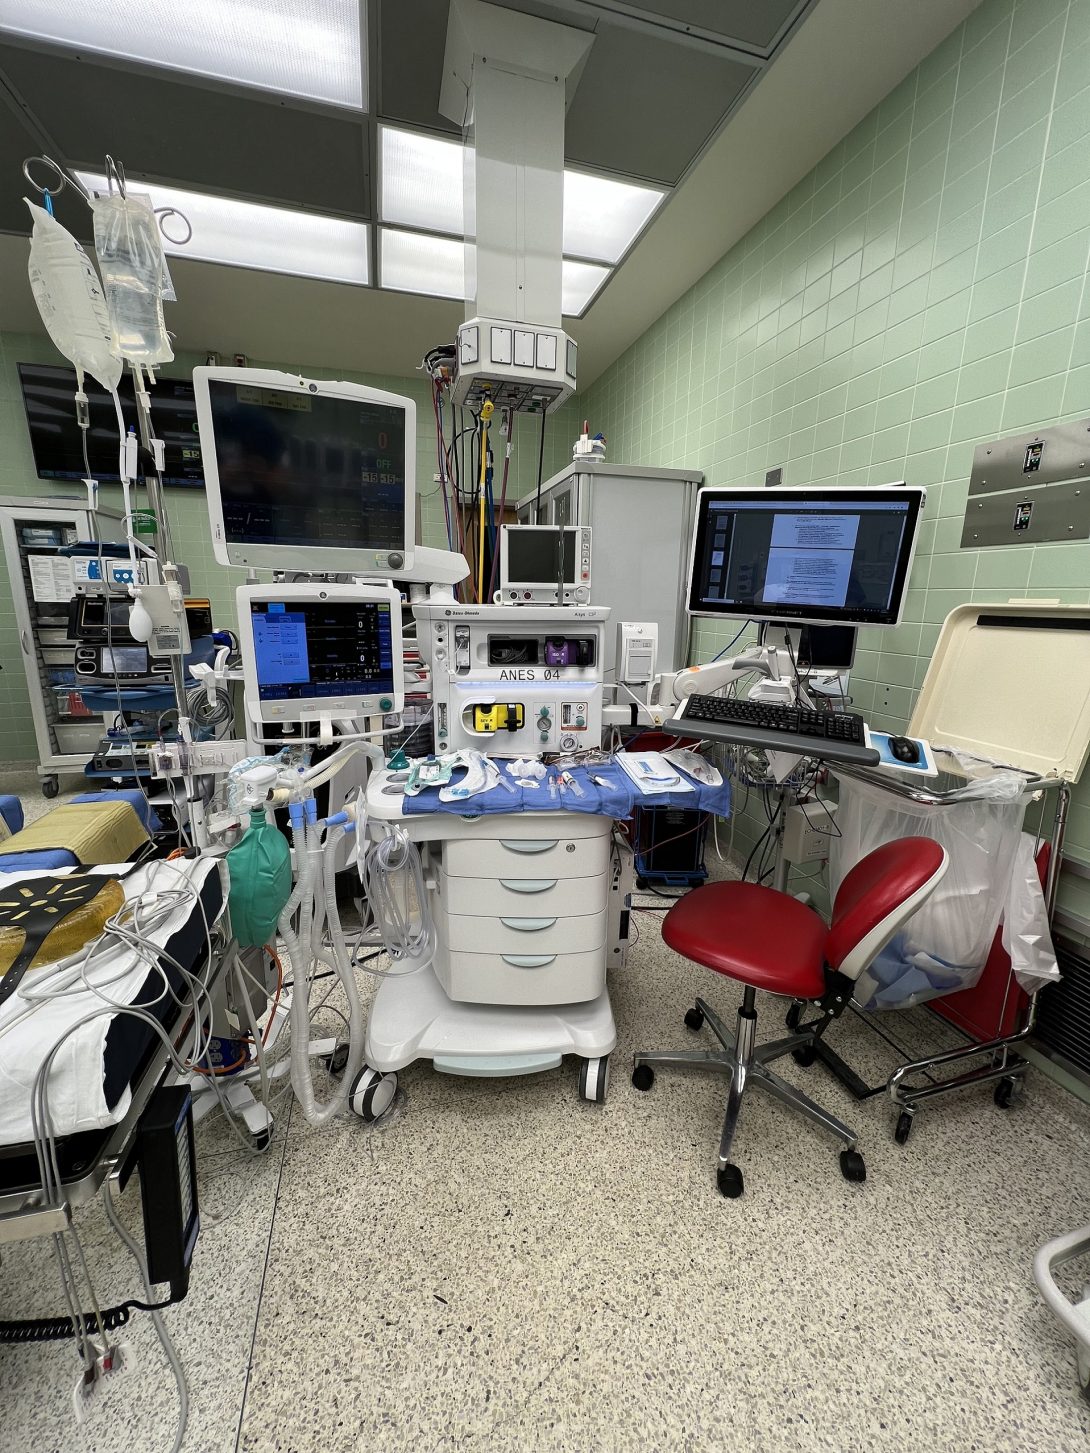 Anesthesia cart, vitals, and IV bag hangers on wheels during Pre-Op